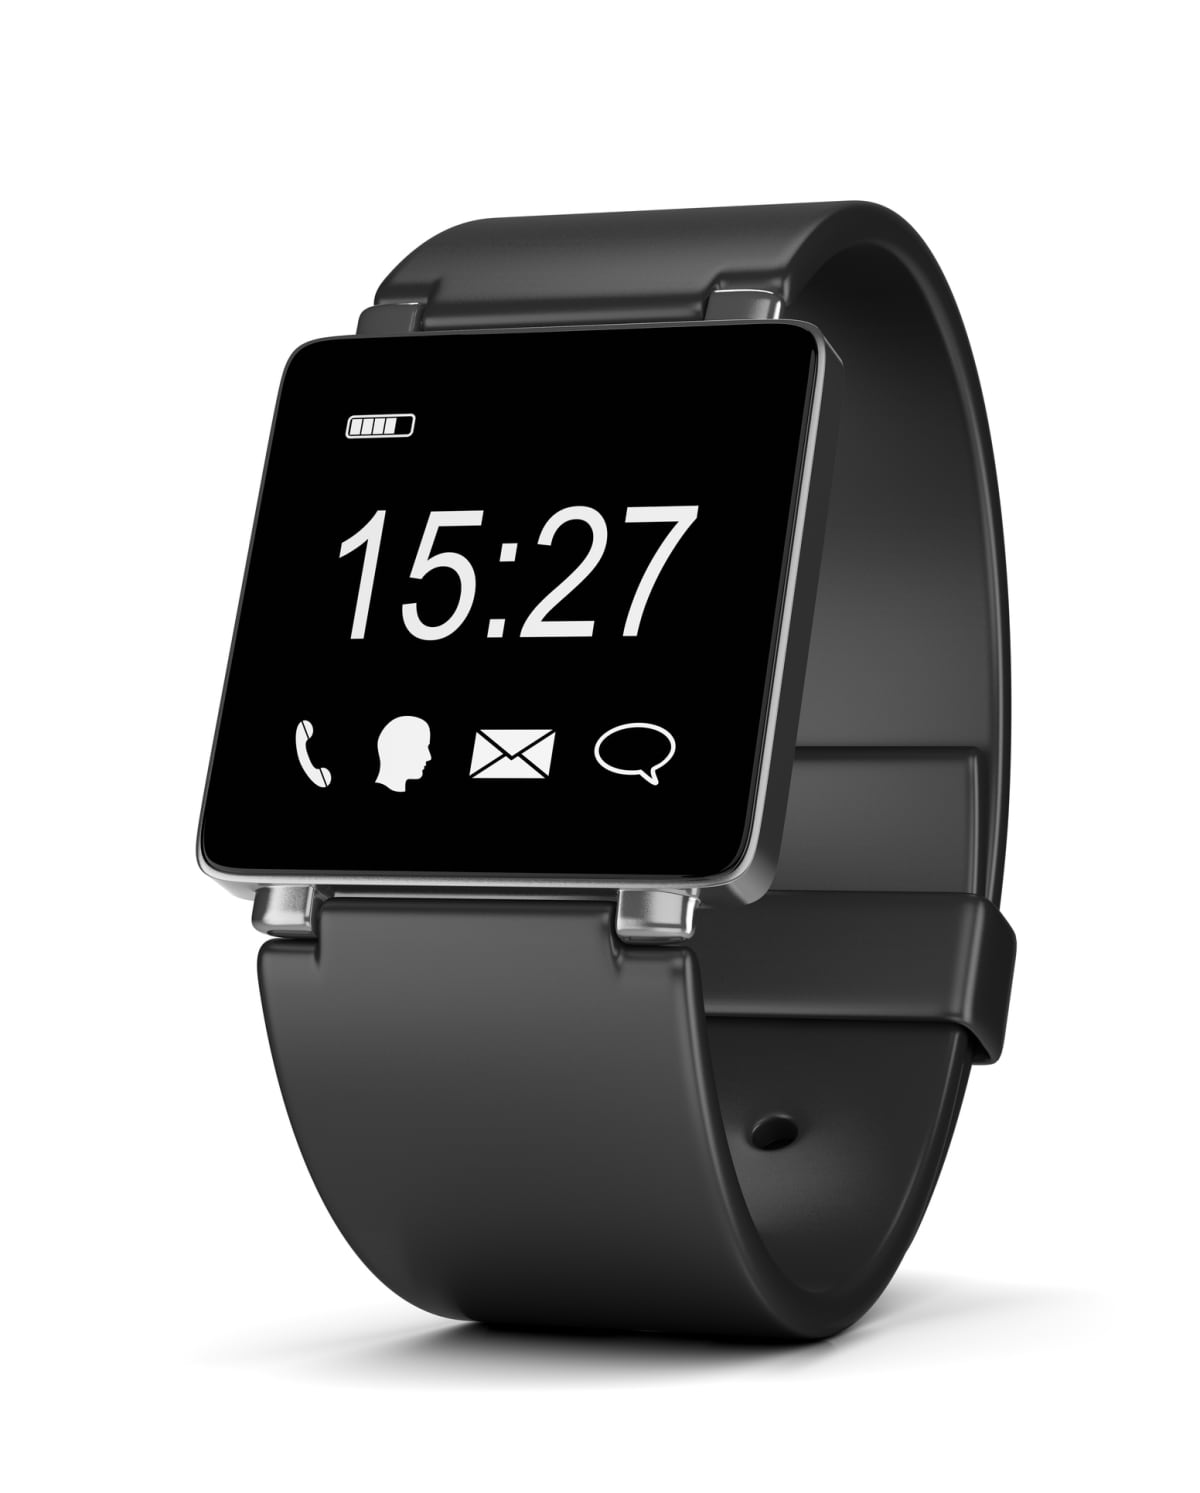 Black Smartwatch with App Icons, Digital Clock and Battery Level on Display on White Background 3D Illustration